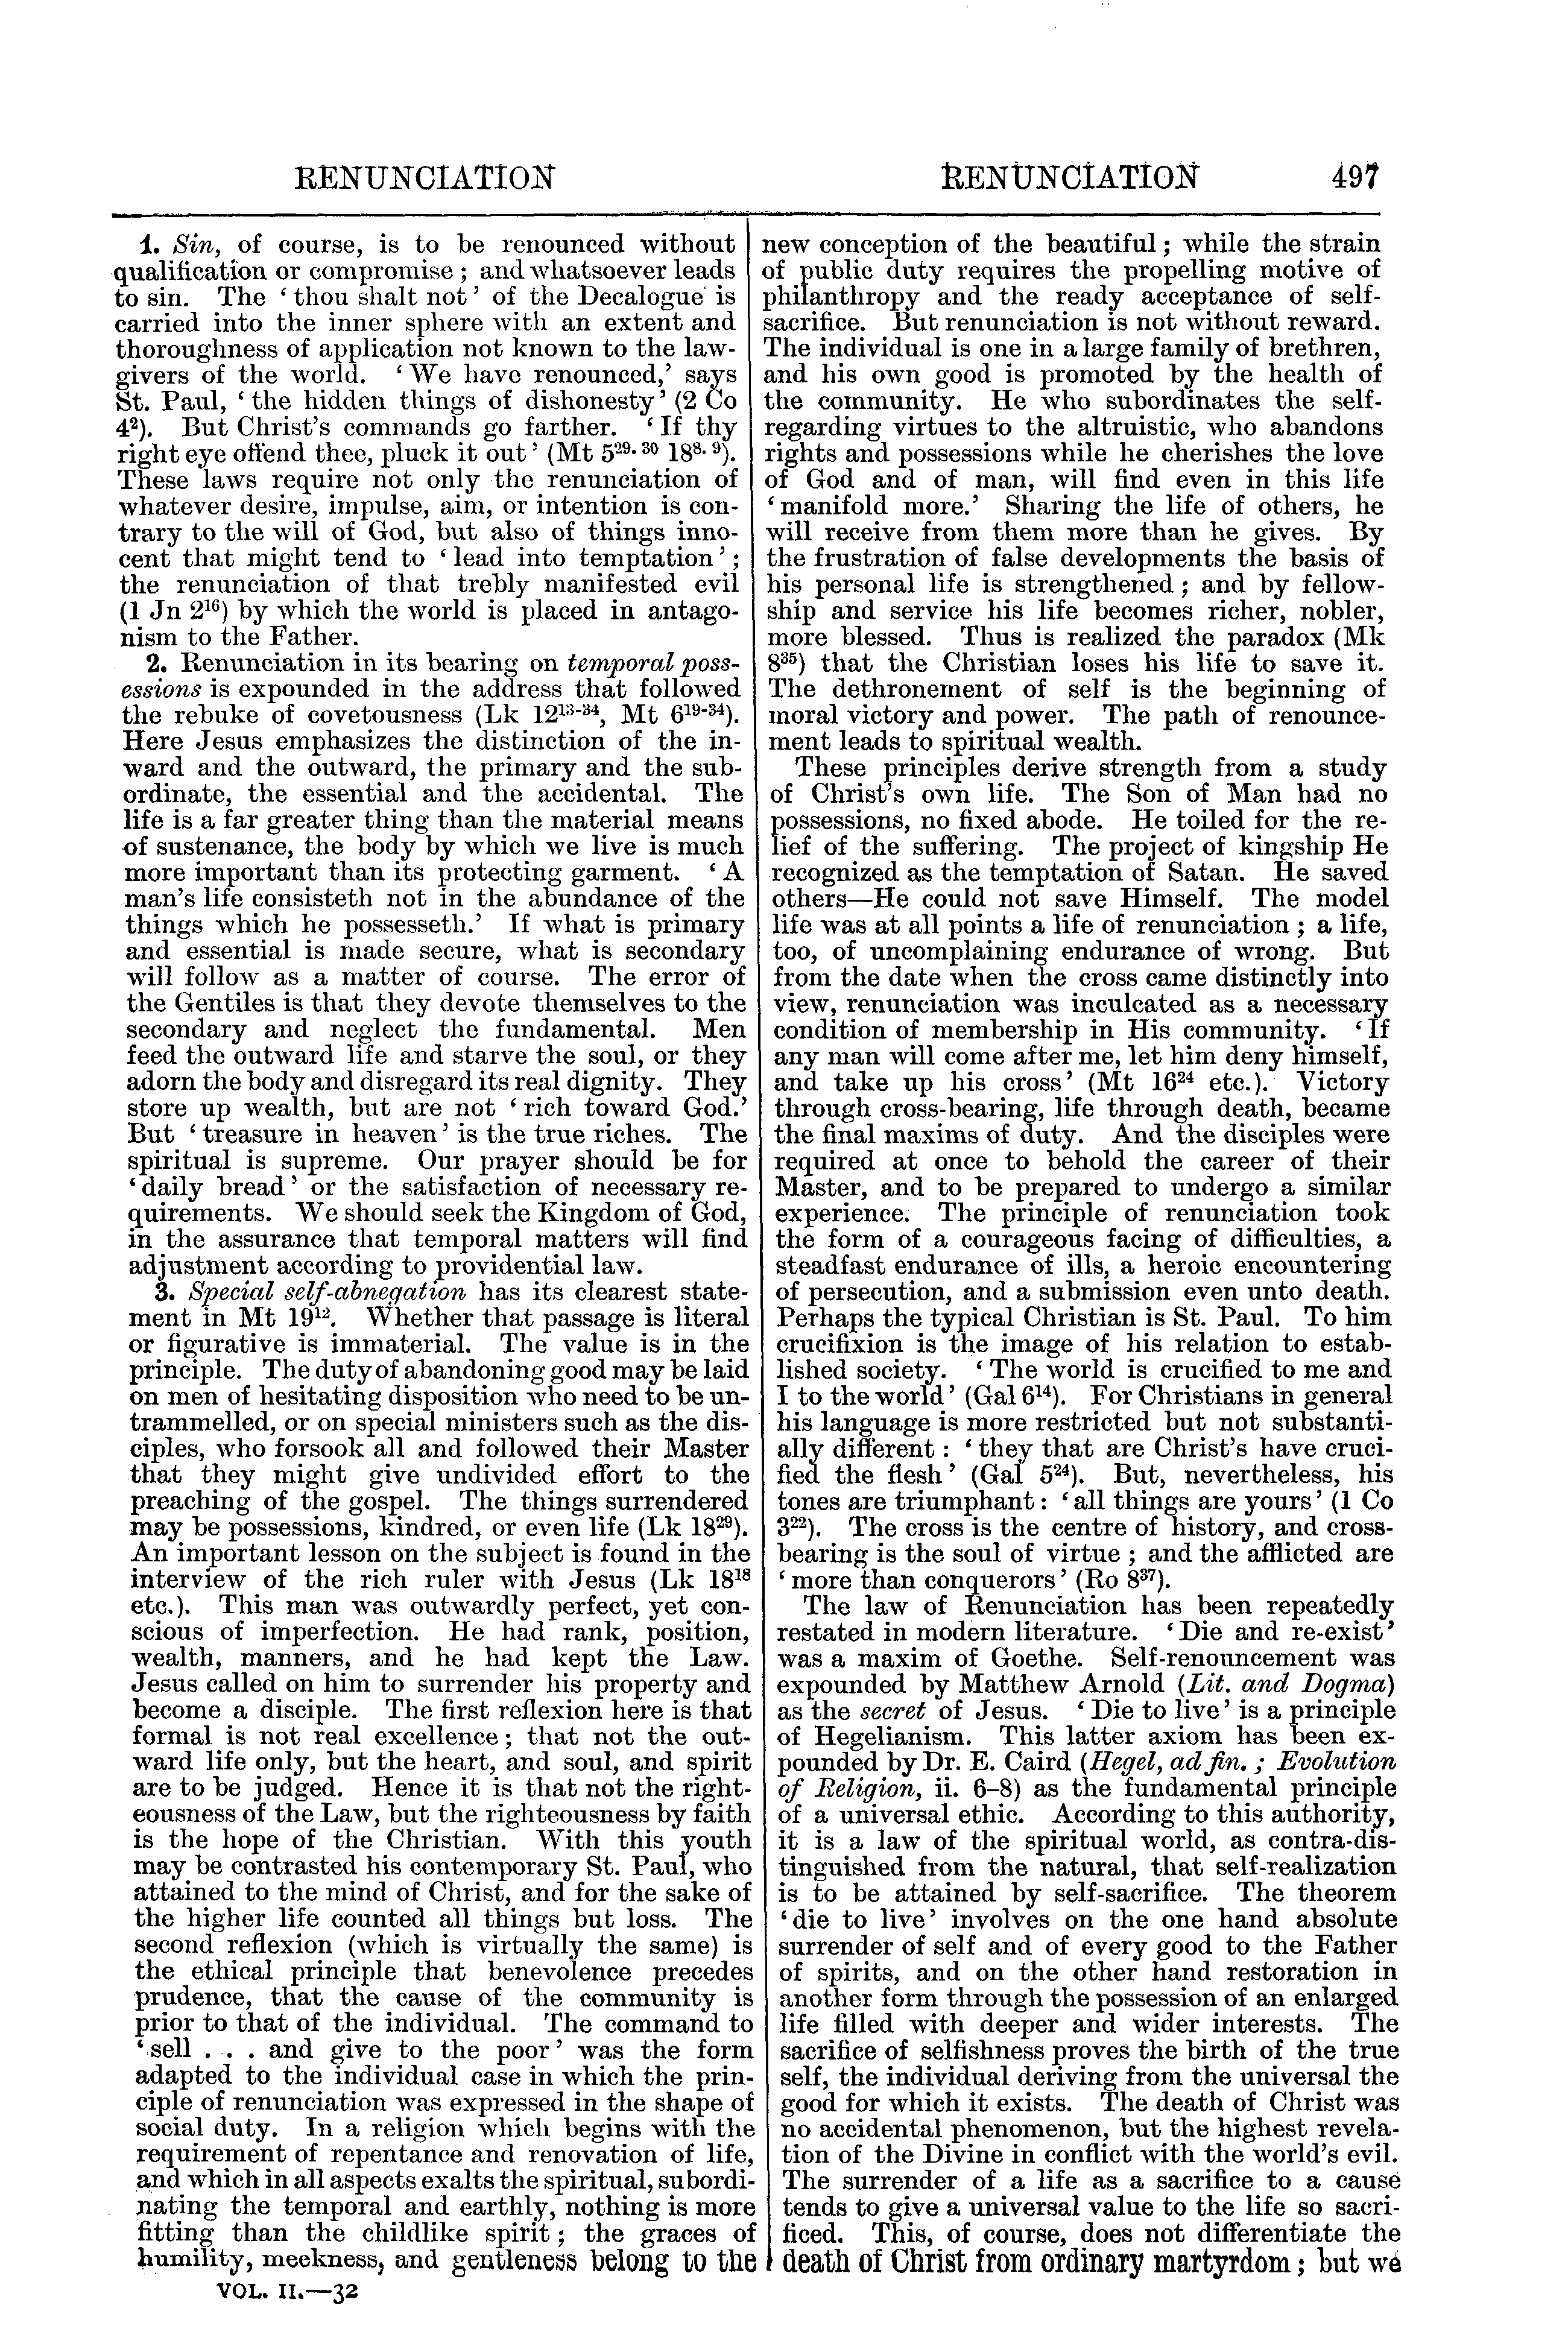 Image of page 497